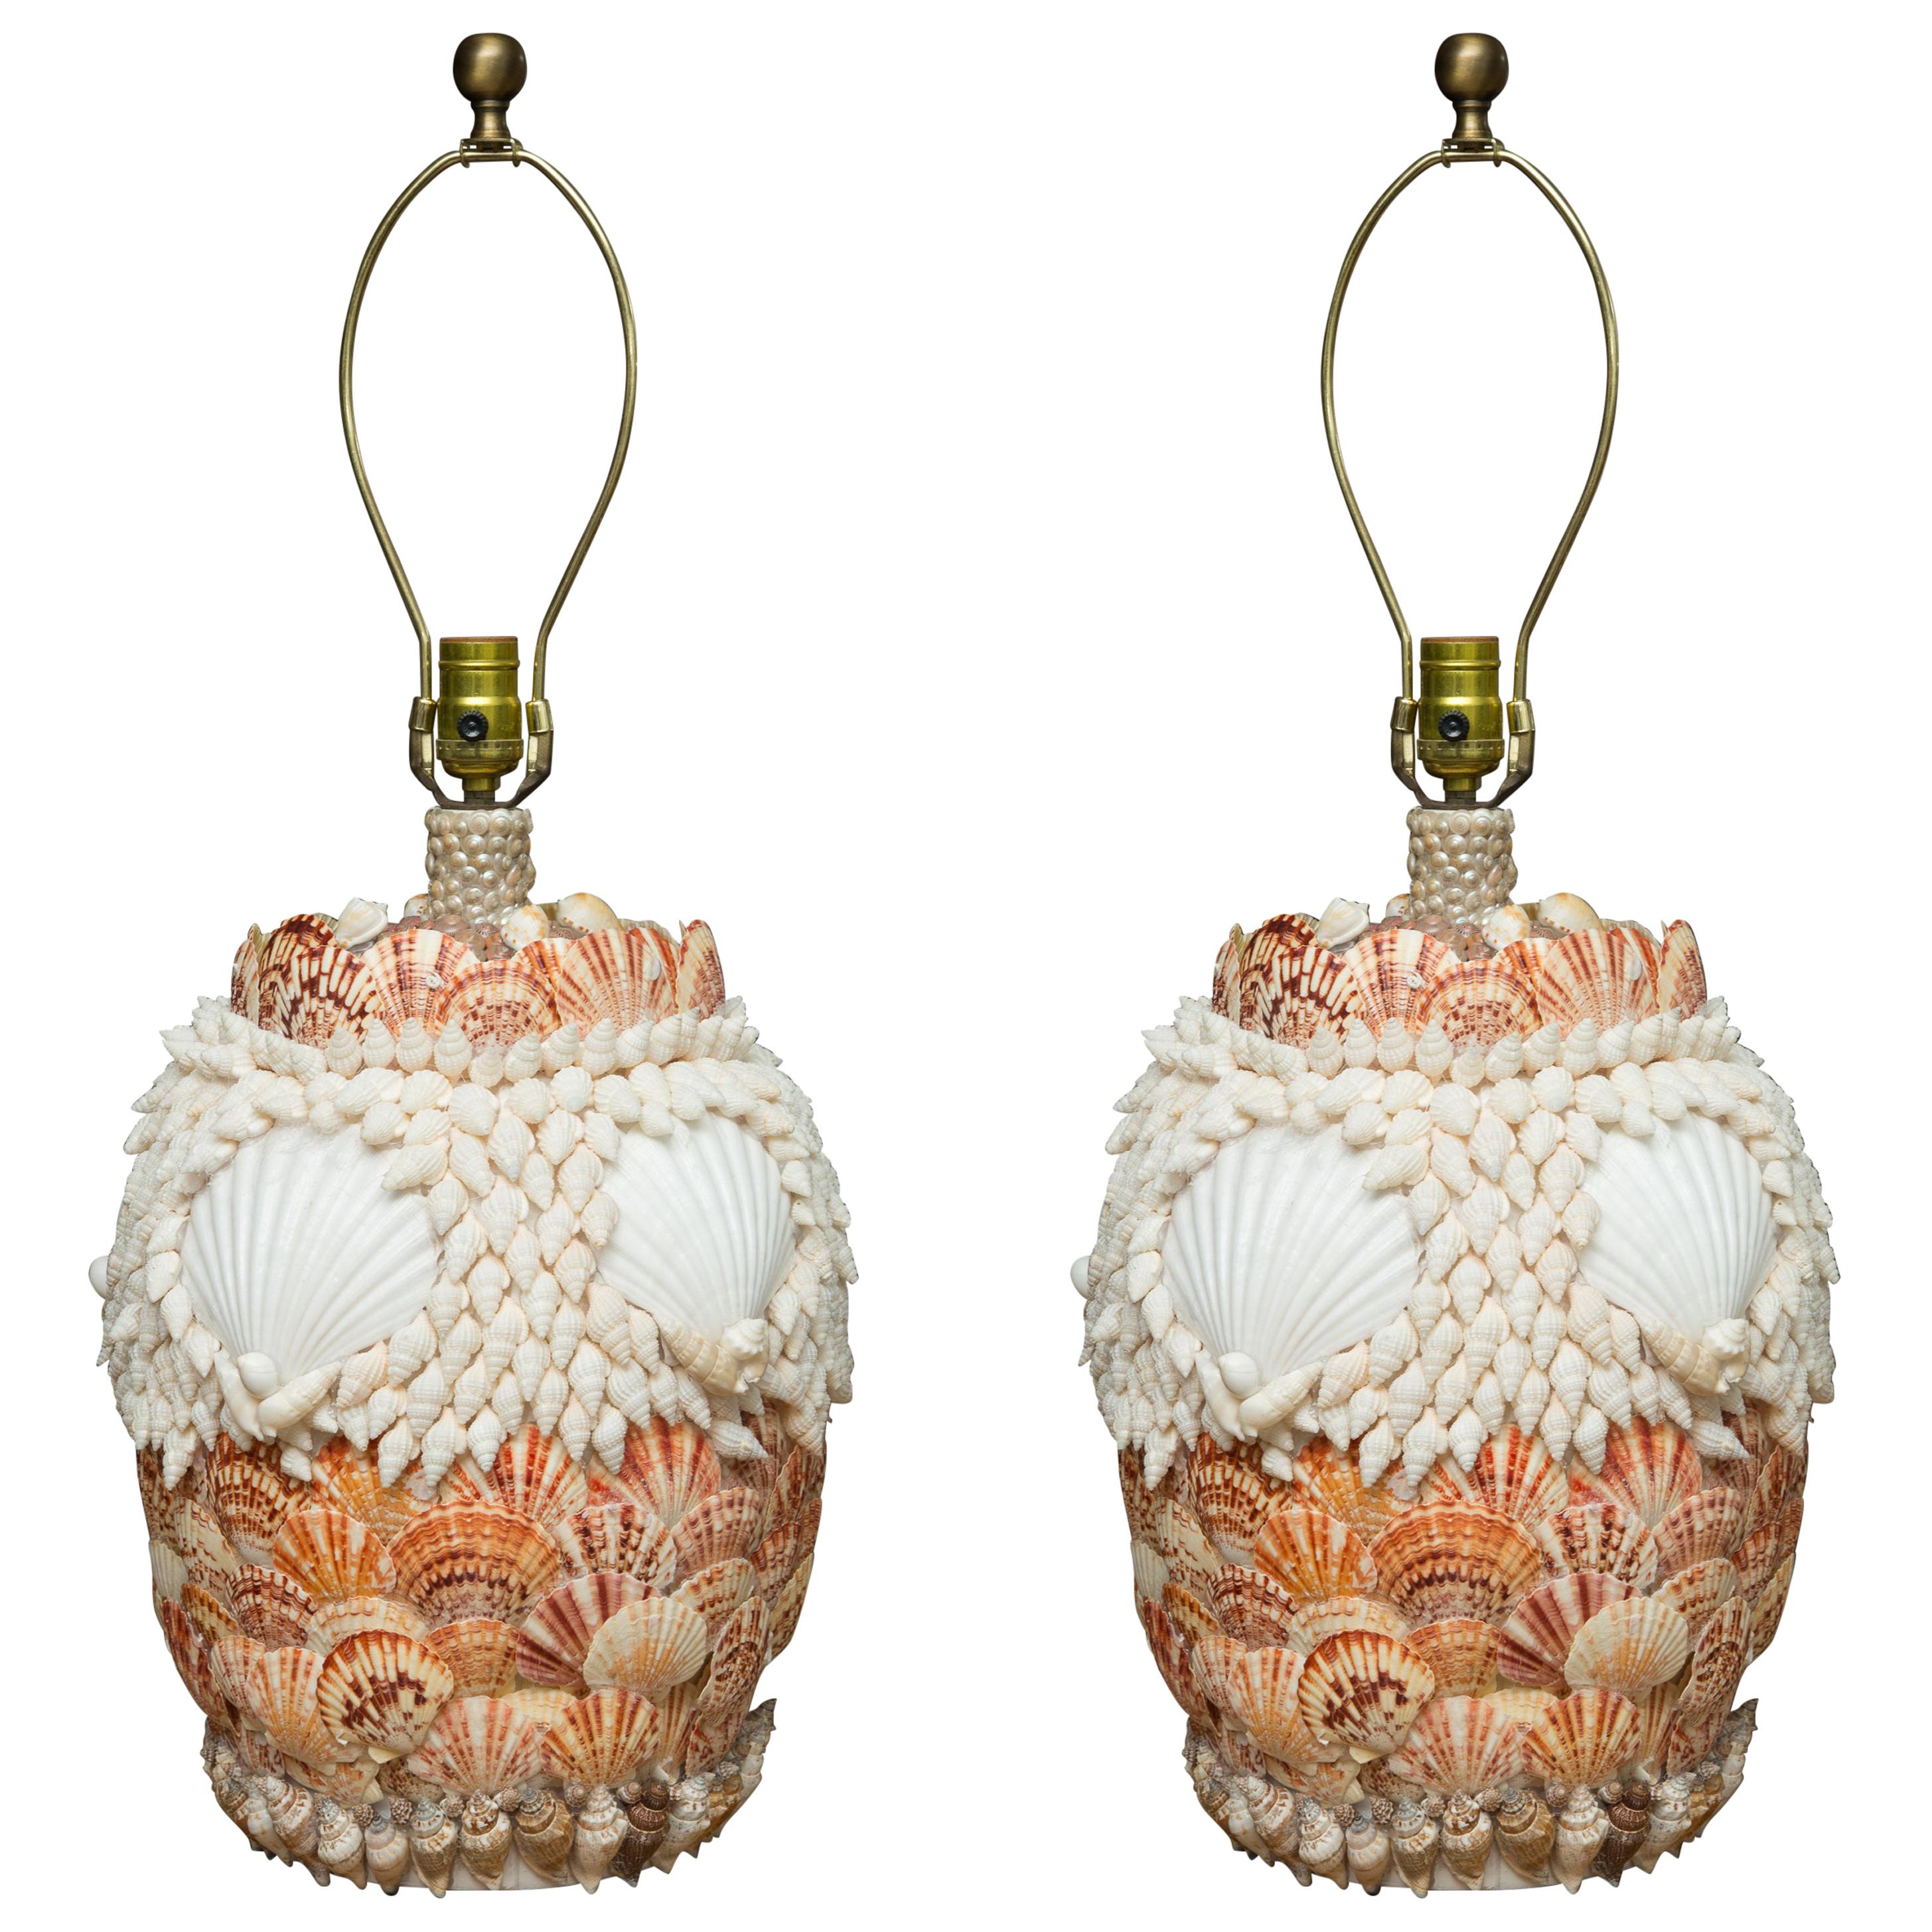 Shell Encrusted Table Lamps